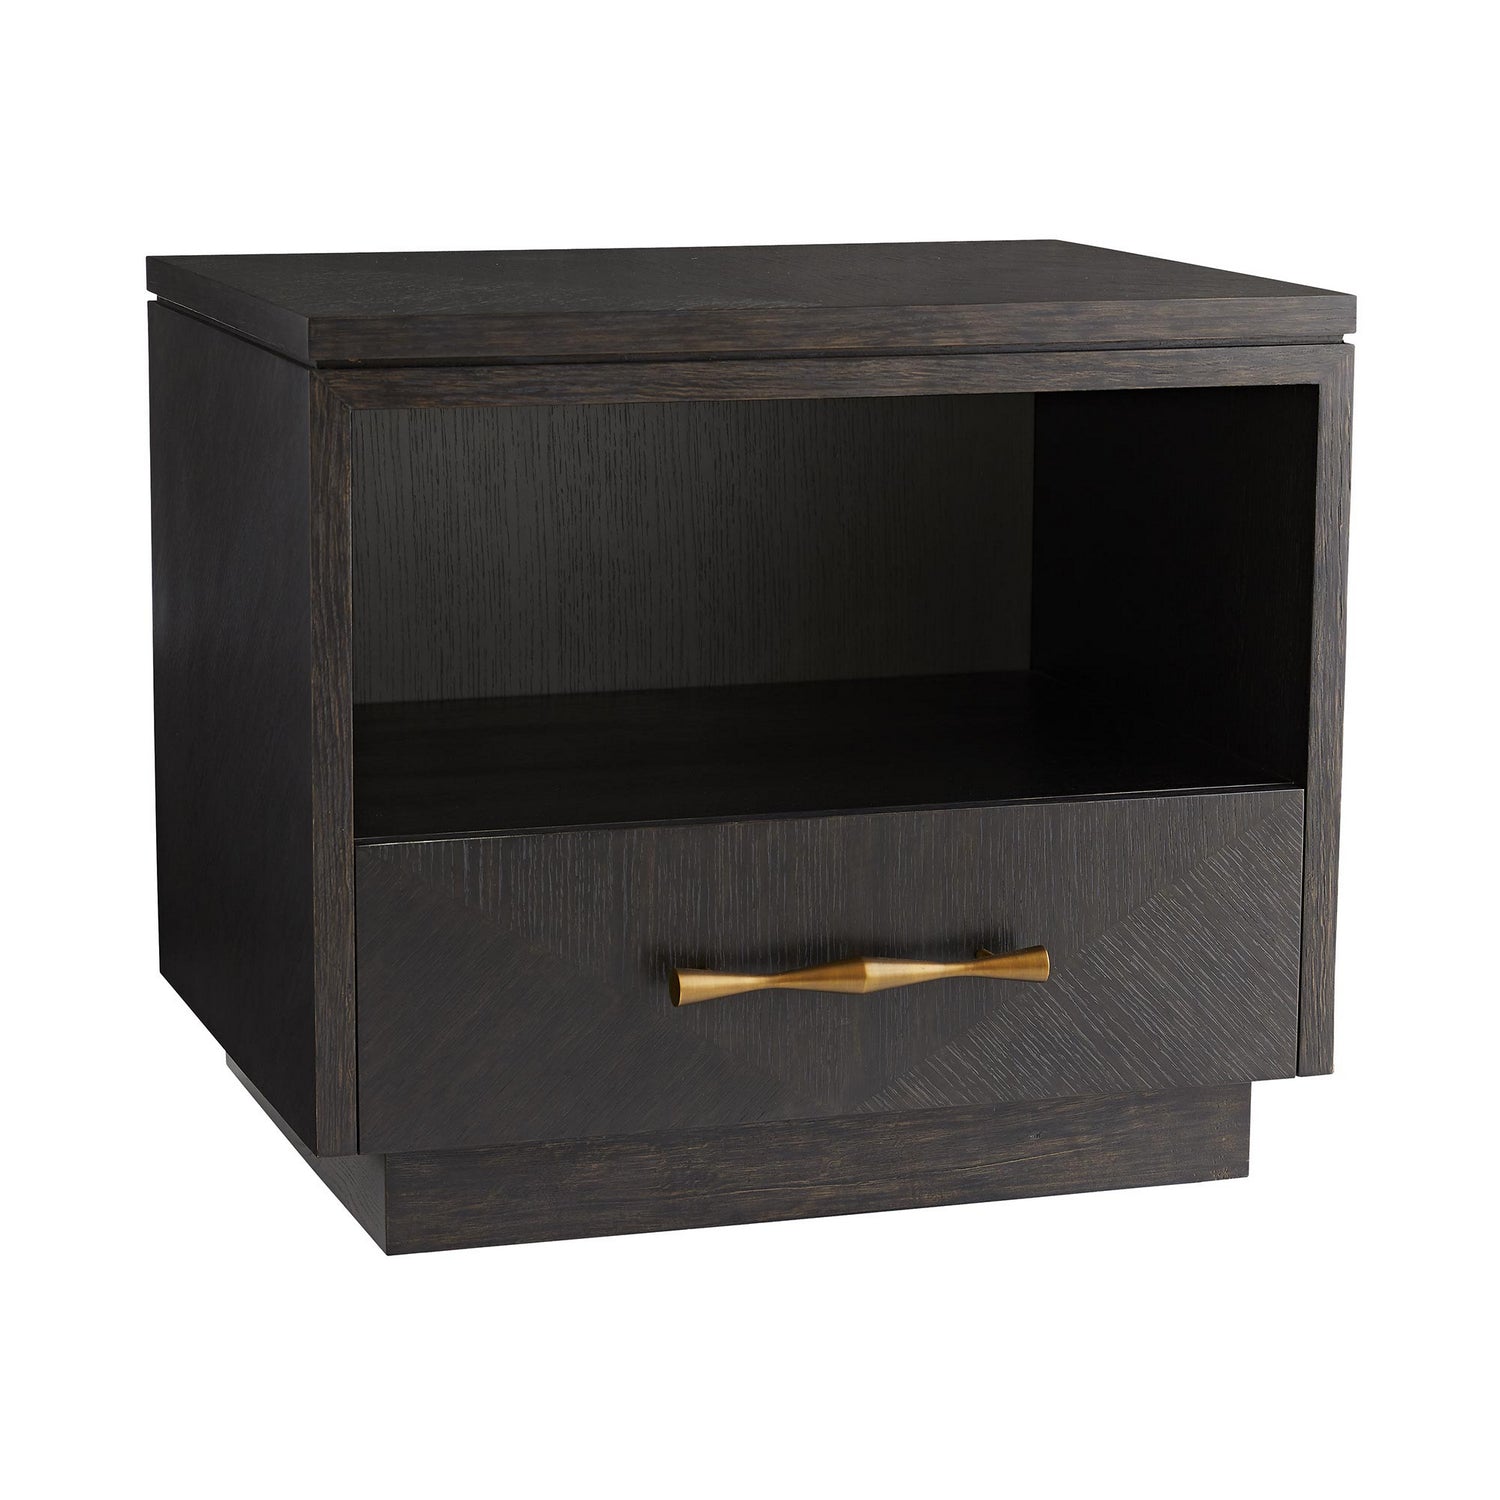 Side Table from the Mallory collection in Ebony finish